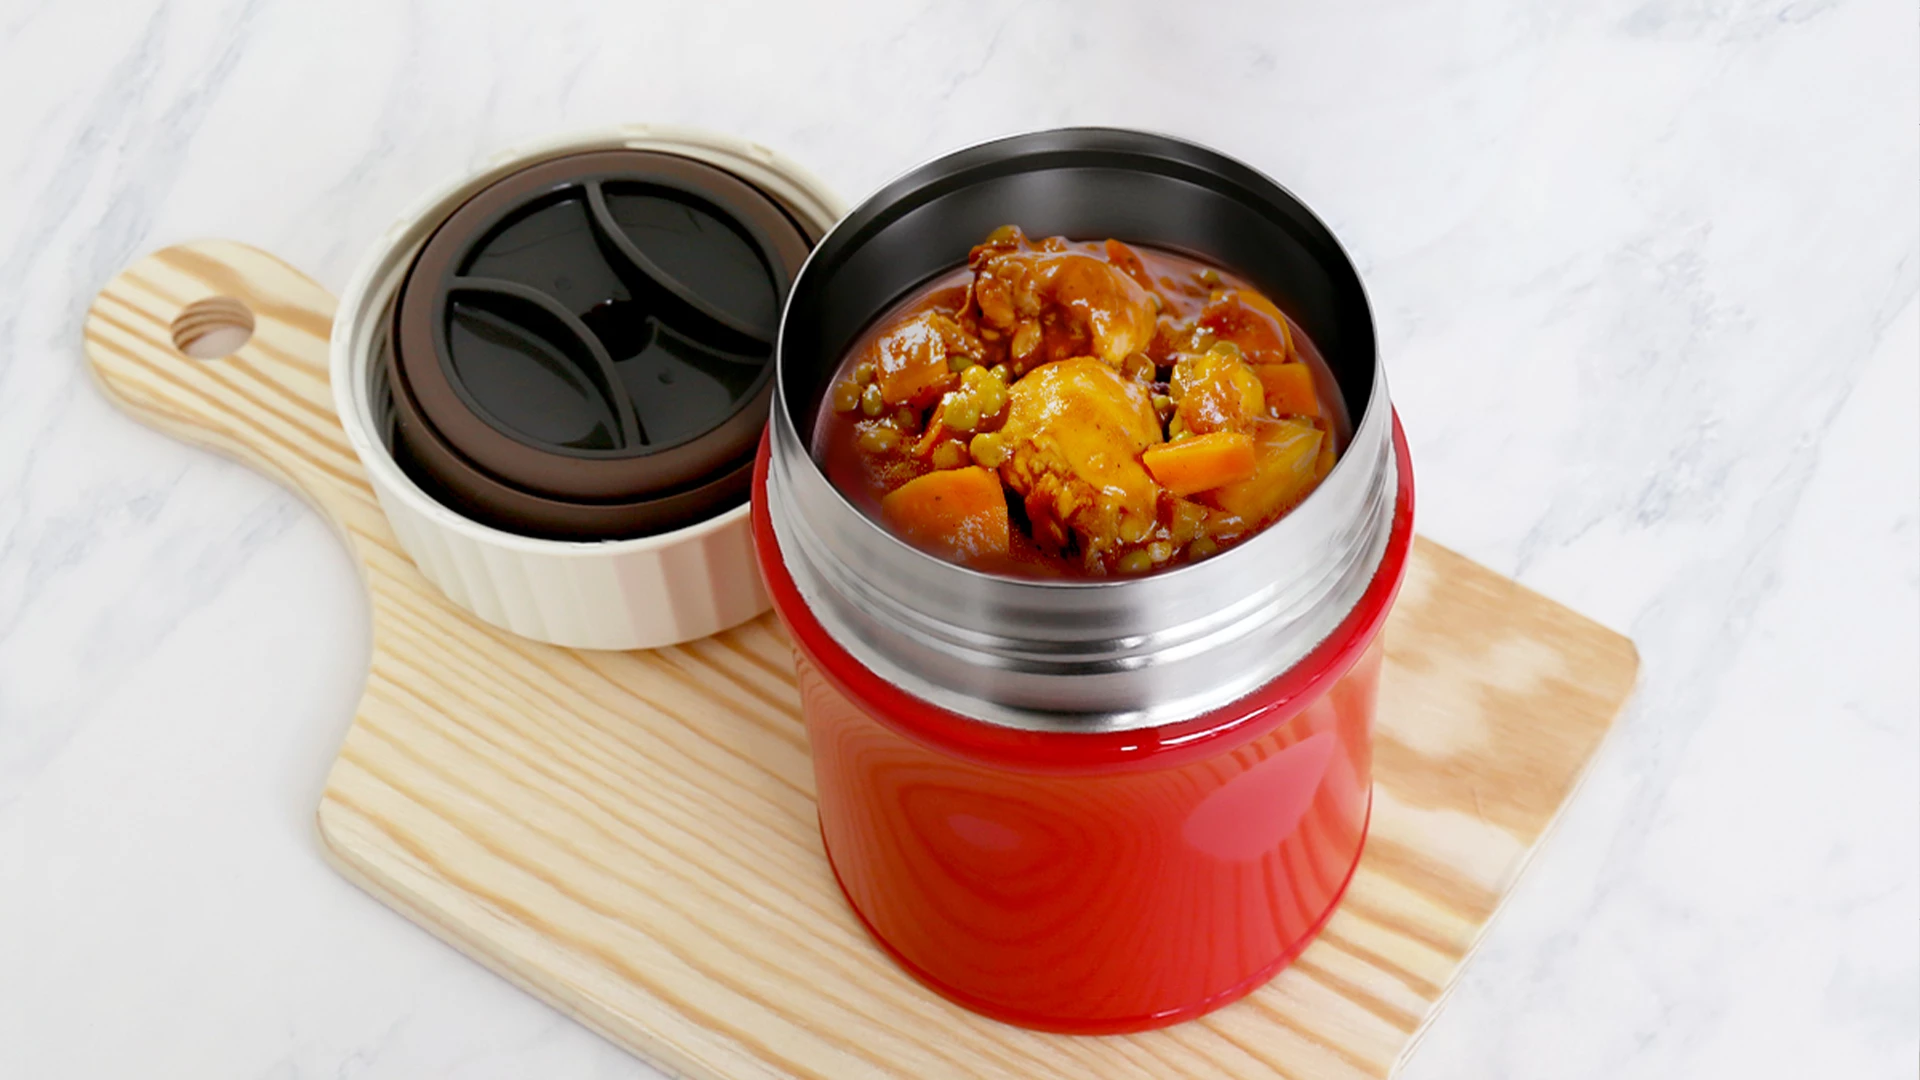 Steps to make warm soup last longer in thermos